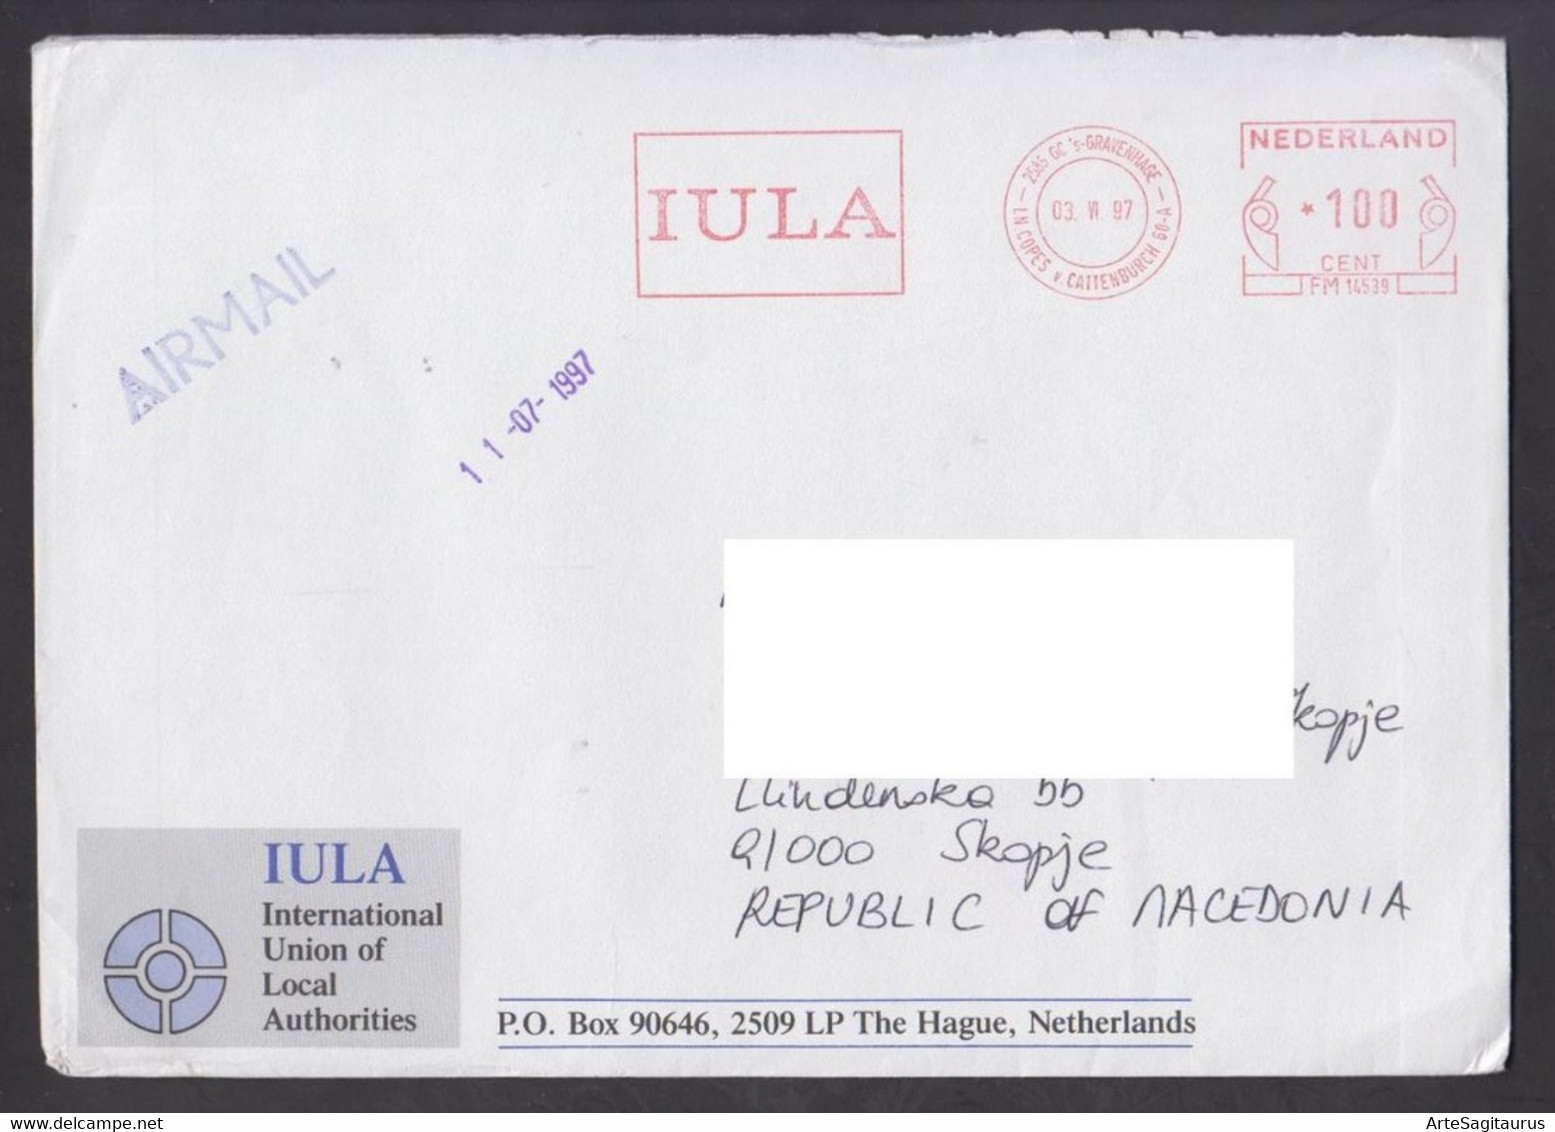 NETHERLANDS, COVER - Republic Of Macedonia, Flamme, Air Mail  (006) - Covers & Documents